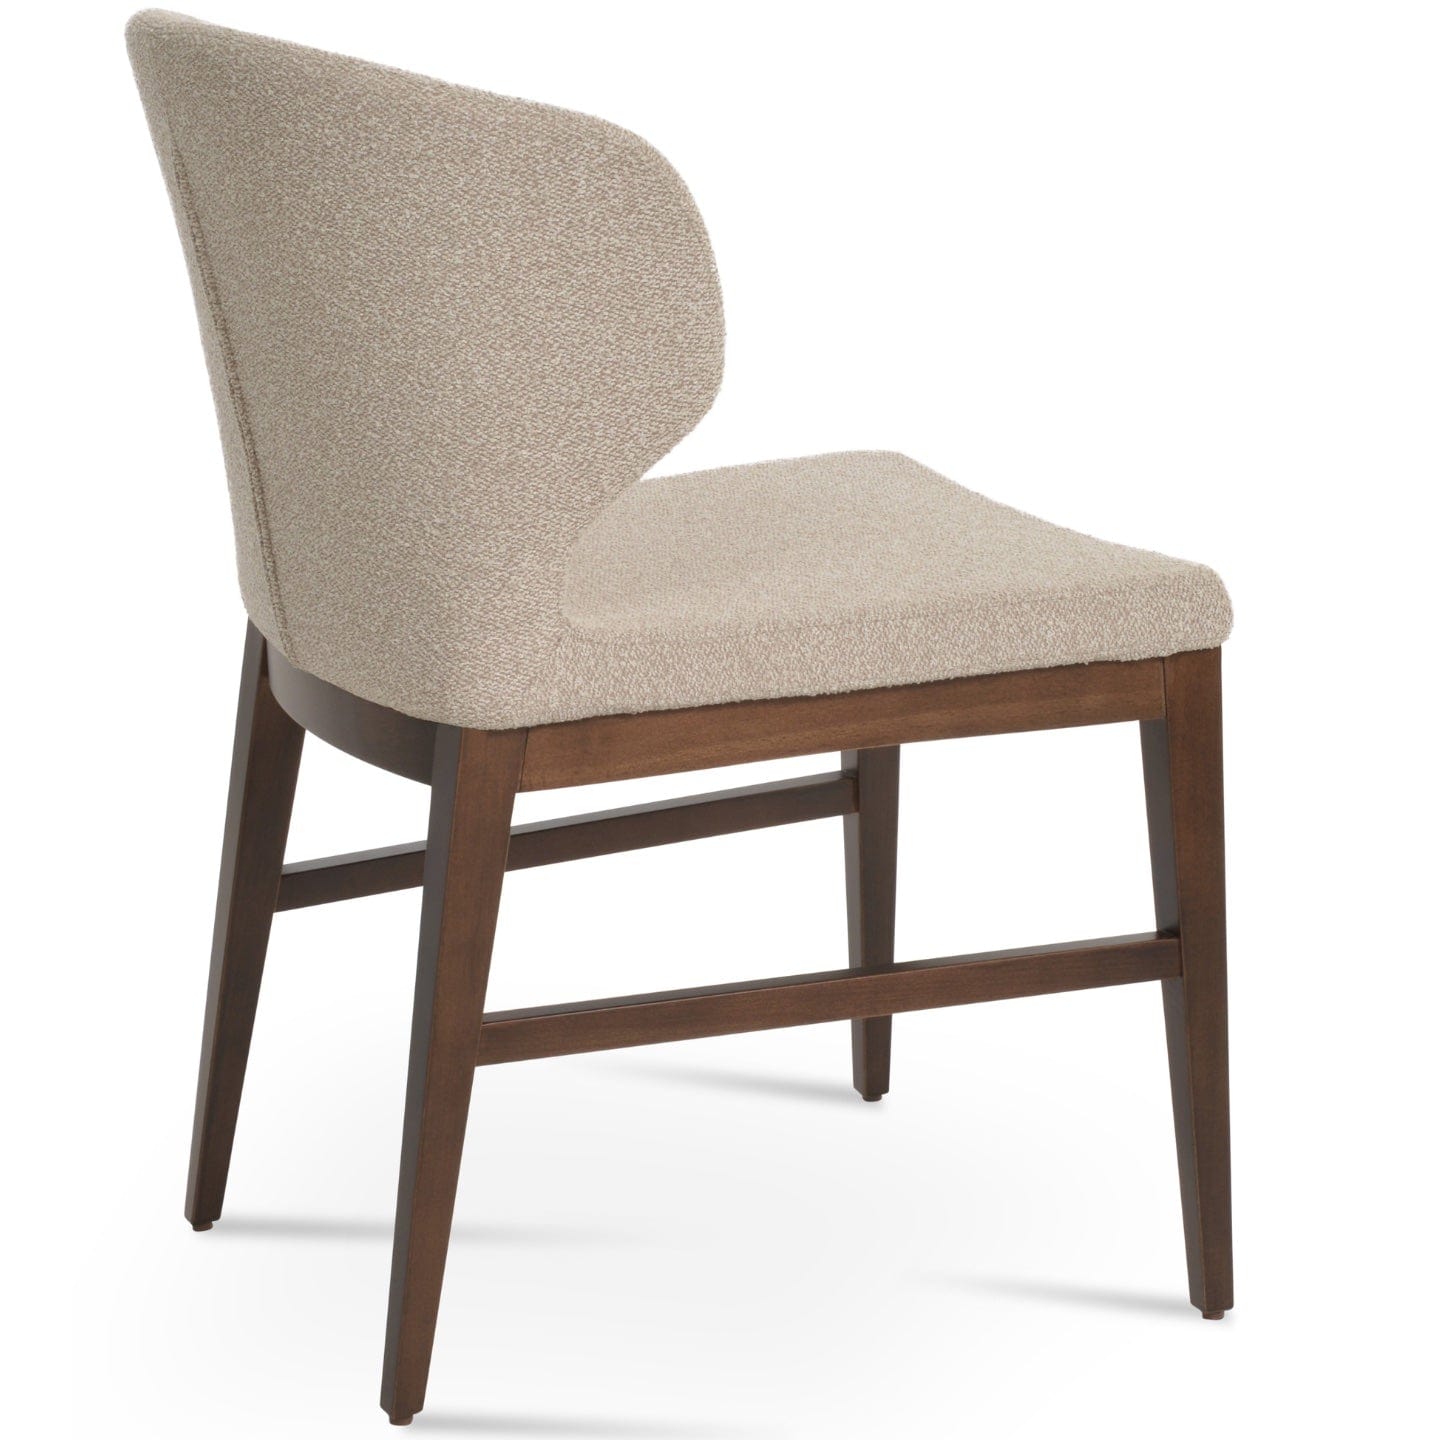 sohoConcept Kitchen & Dining Room Chairs Amed PLUS Stretcher Wood Chairs | Boucle Upholstered Commercial Dining Chairs